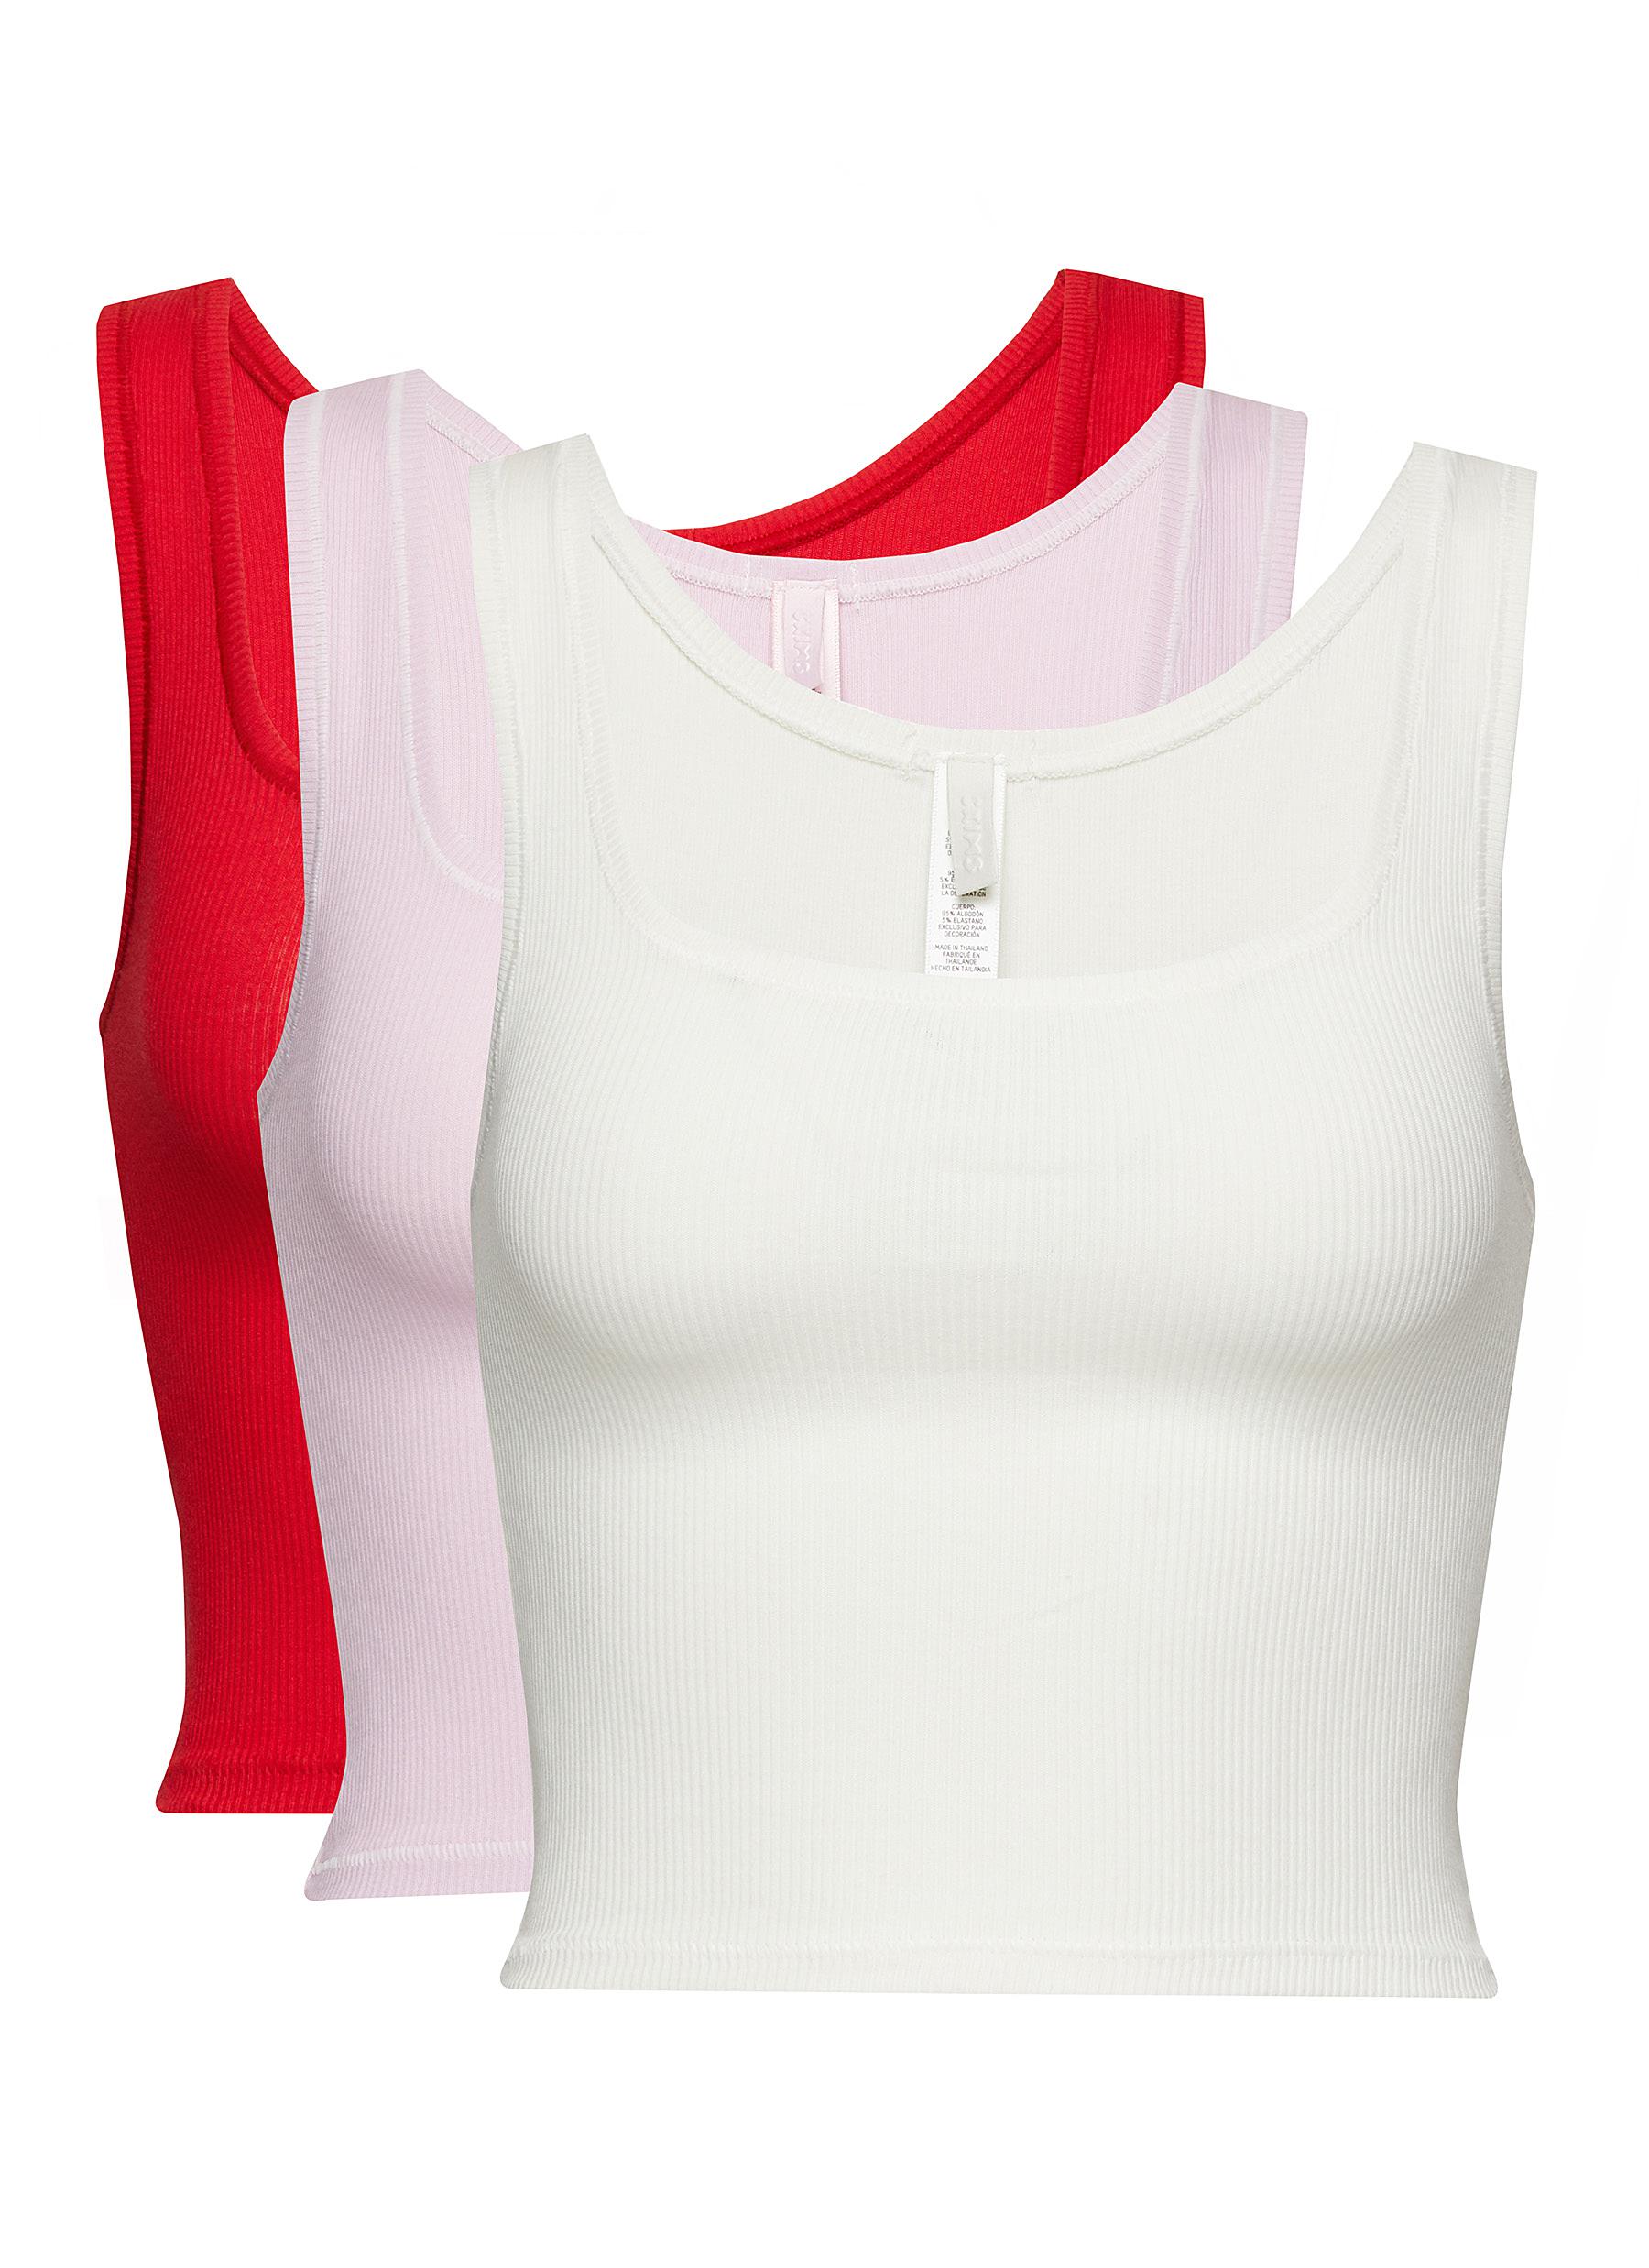 Skims Cotton Rib Long Tank In Stock Availability and Price Tracking